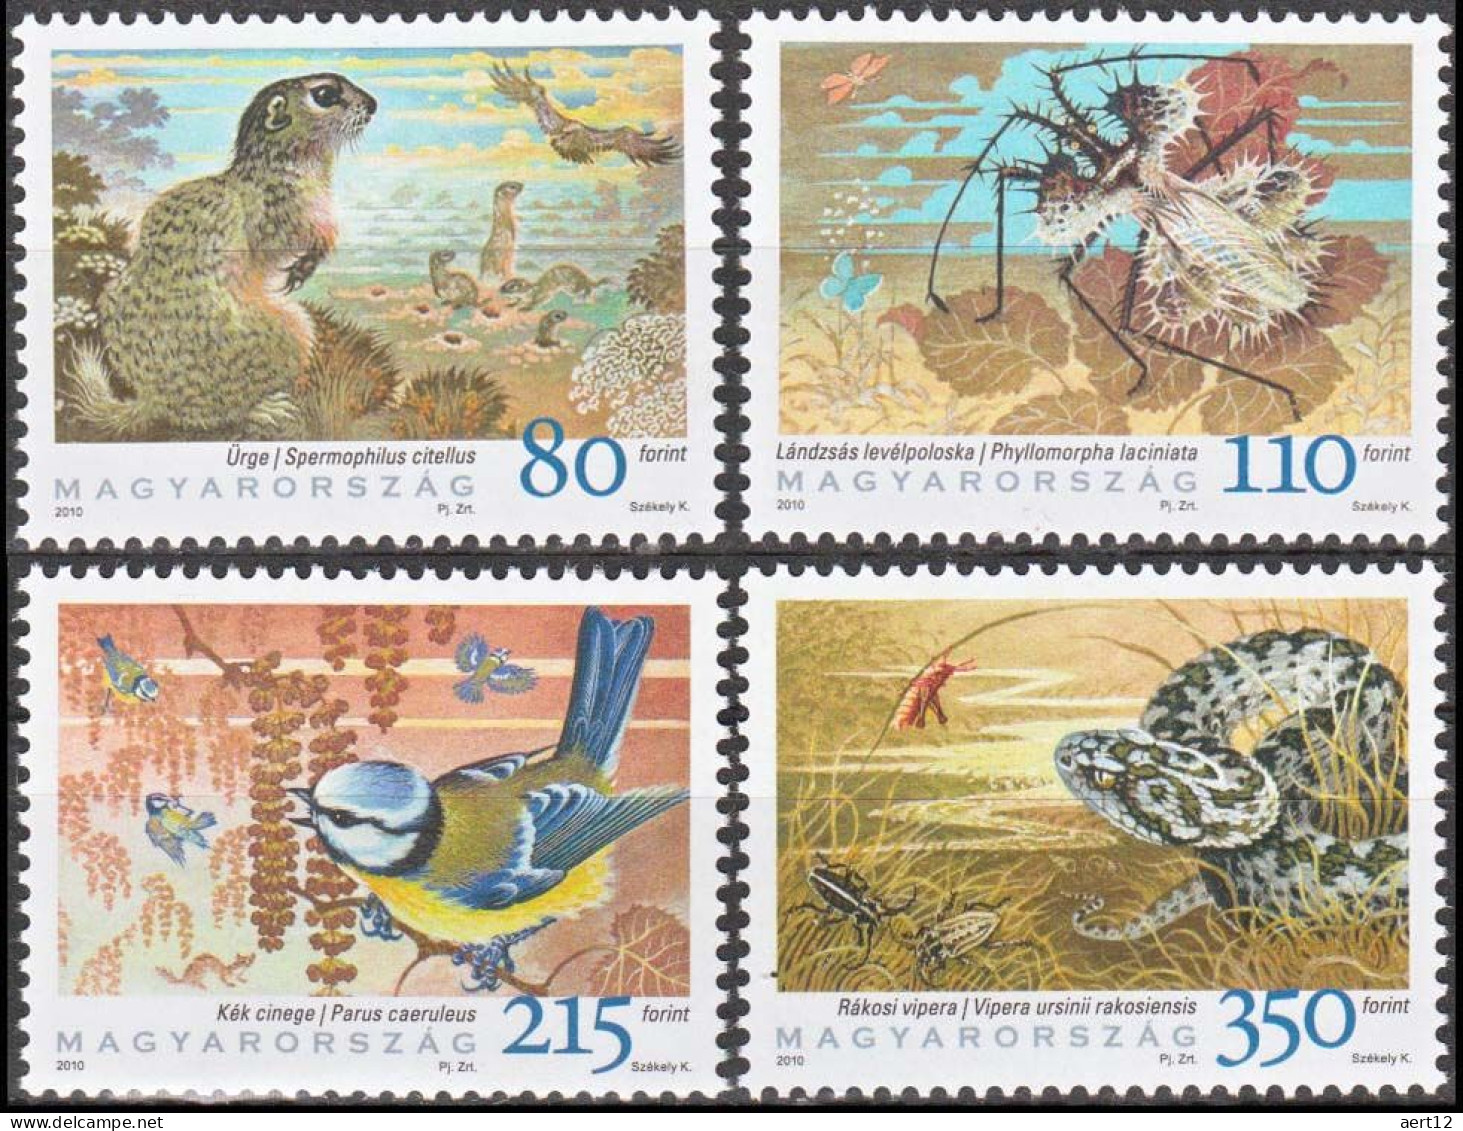 2010, Hungary, Biodiversity, Birds, Insects, Rodents, Snakes, Squirrels, 4 Stamps, MNH(**), HU 5473-76 - Serpents